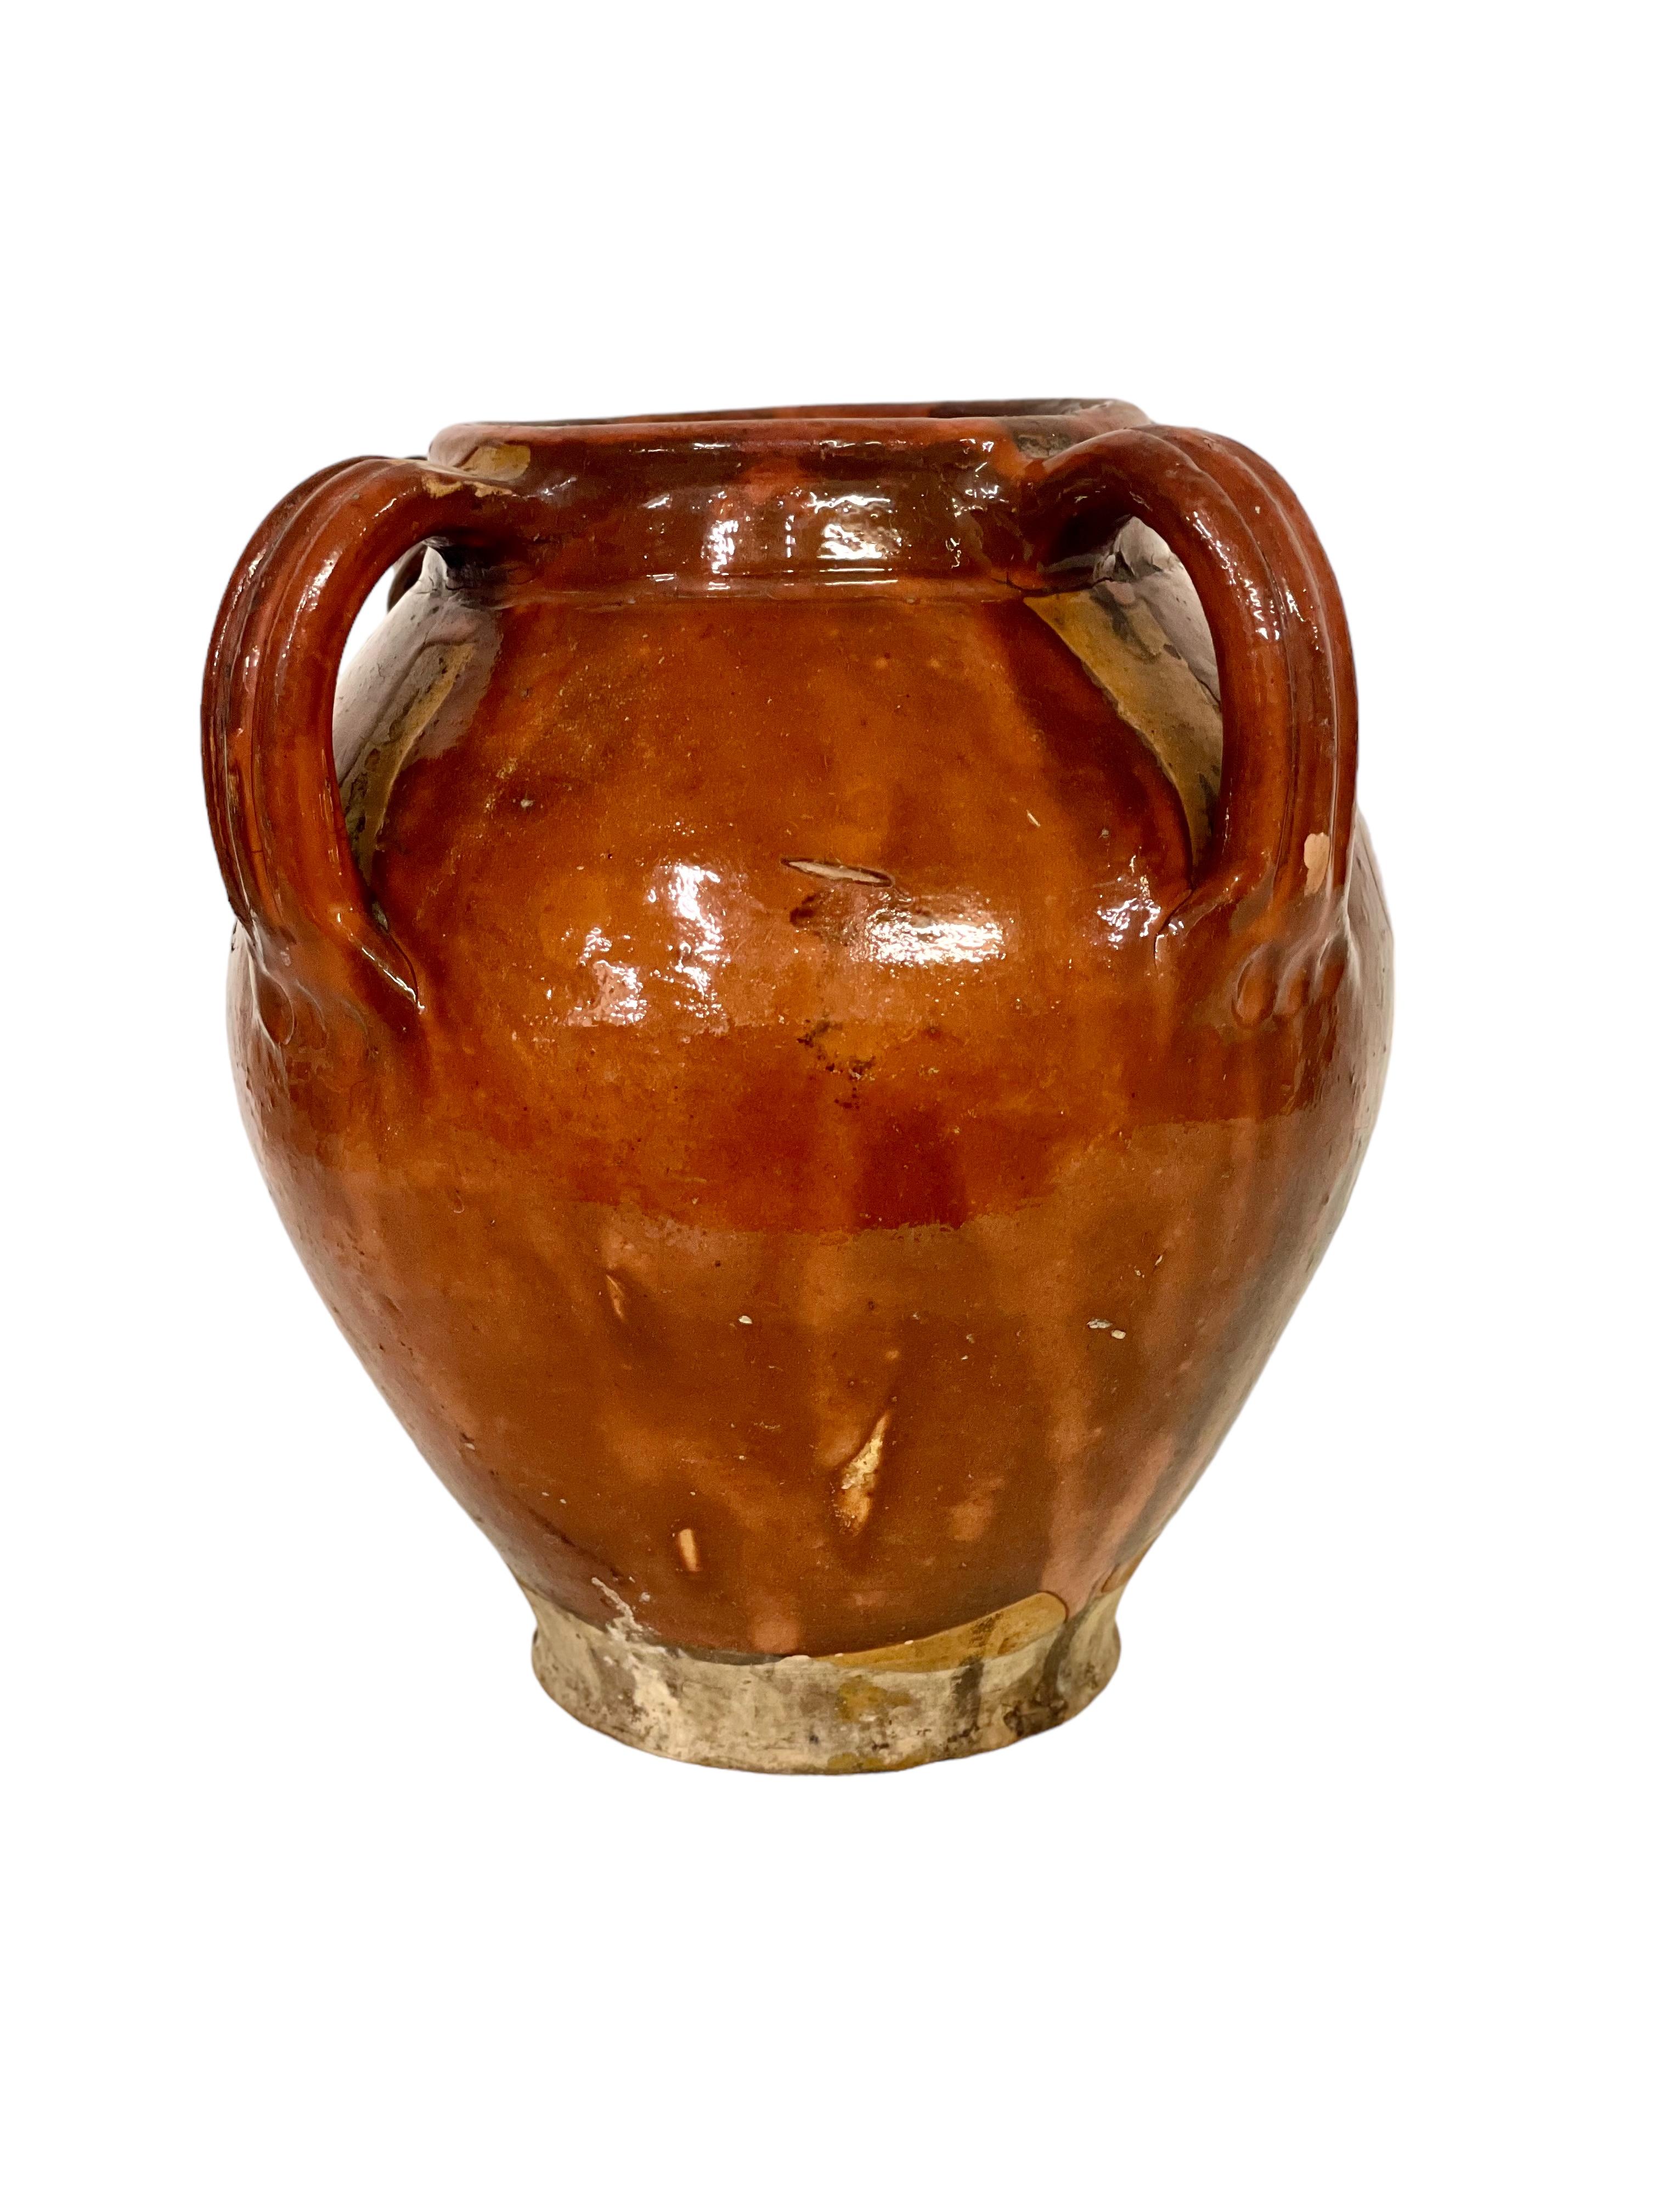 Earthenware 19th C. Terracotta Jug with Three Handles For Sale